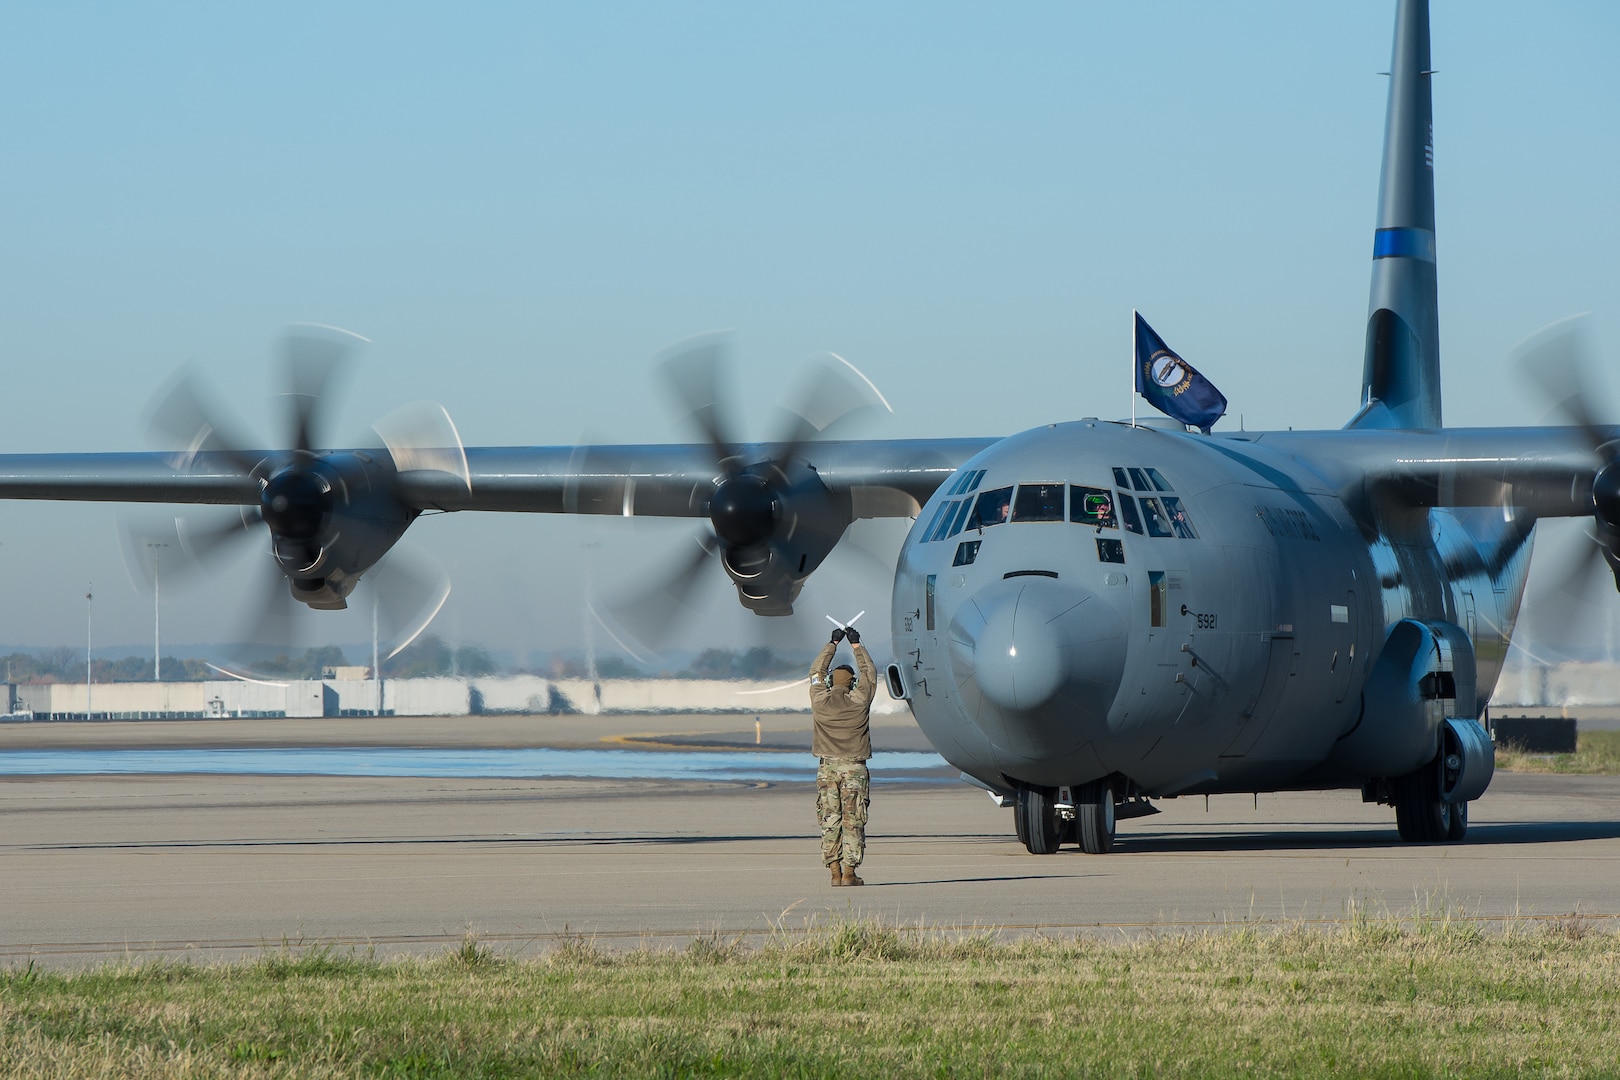 A new C-130J Super Hercules aircraft arrives at the Kentucky Air National Guard Base in Louisville, Ky., Nov. 6, 2021, ushering in a new era of aviation for the 123rd Airlift Wing. The state-of-the-art transports are among eight the wing will receive over the next 11 months to replace eight aging C-130H aircraft, which were built in 1992 and have seen duty all over the world.